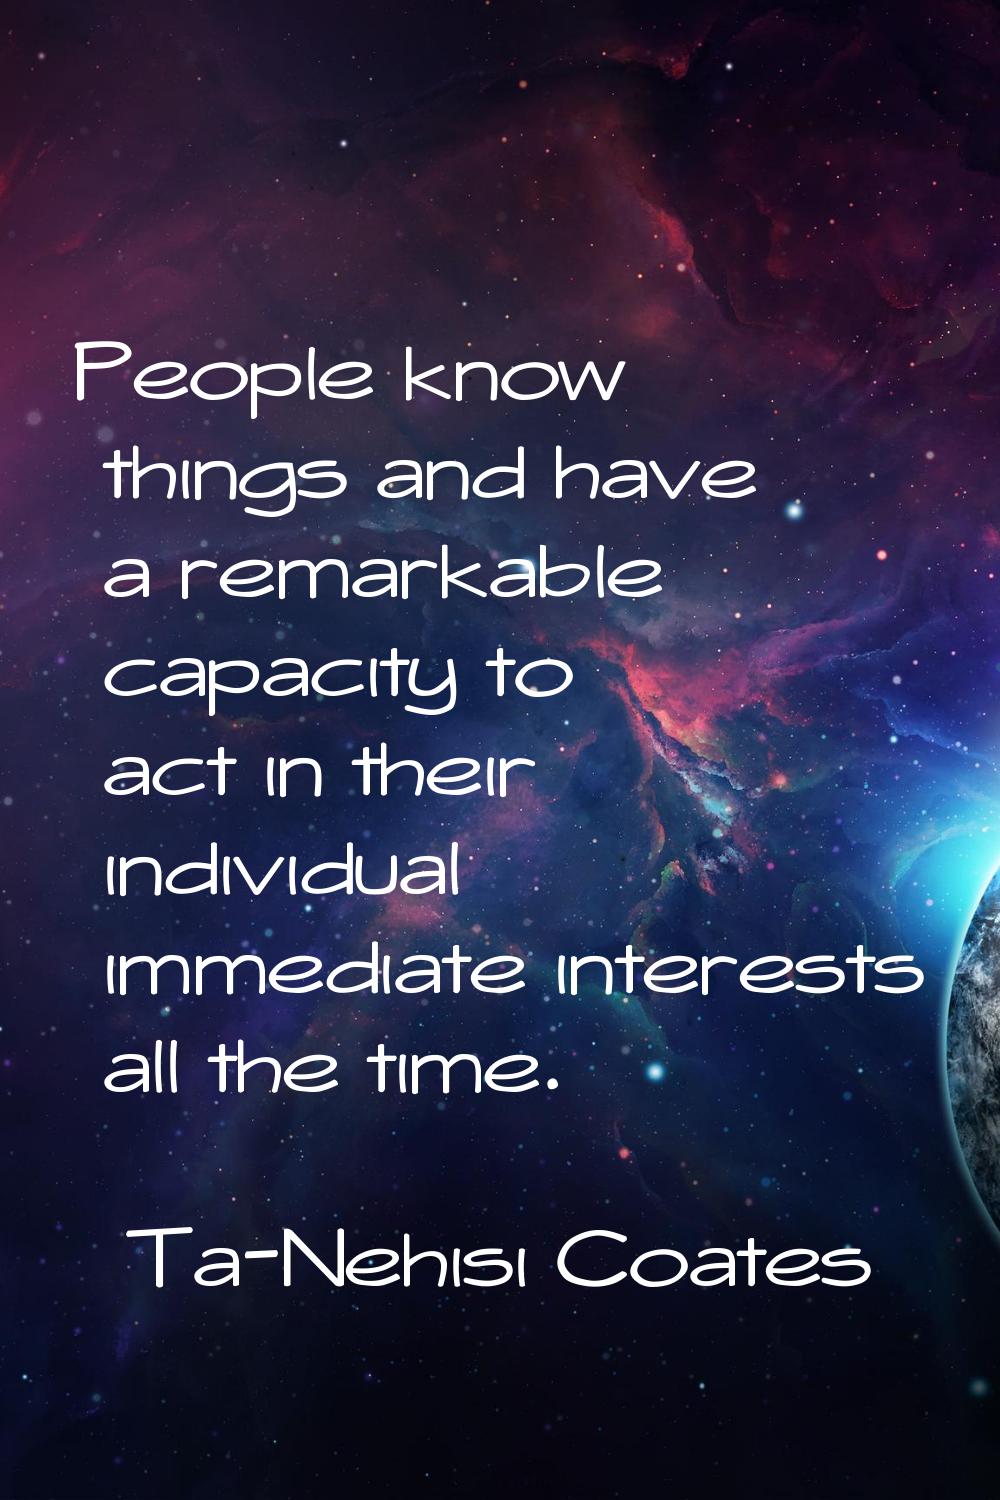 People know things and have a remarkable capacity to act in their individual immediate interests al